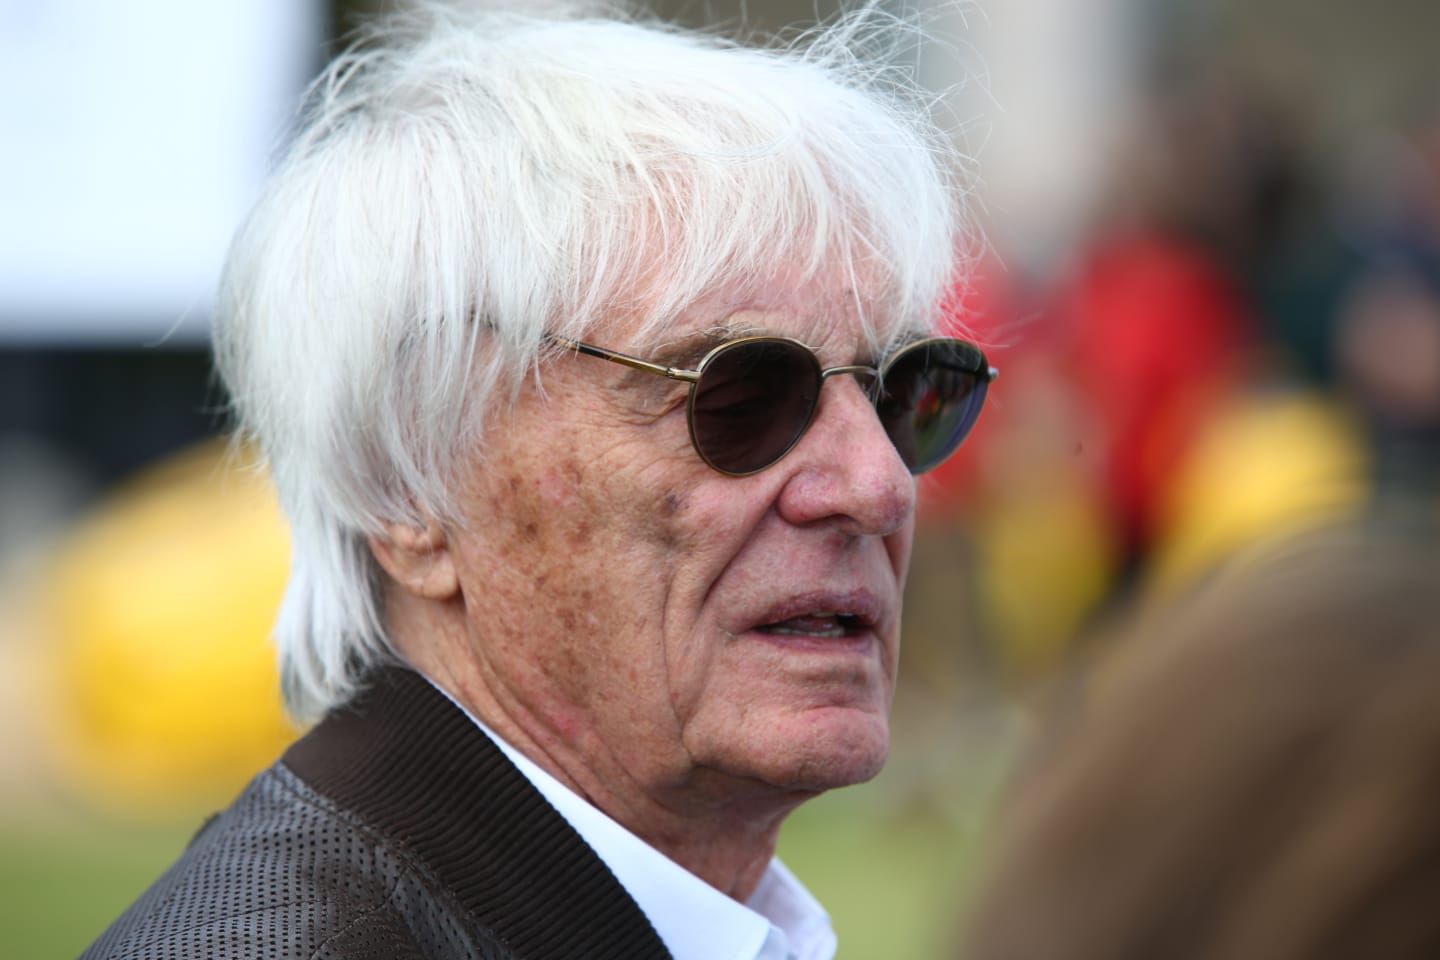 www.sutton-images.com Bernie Ecclestone (GBR) at Goodwood Festival of Speed, Goodwood, England, 30 June - 2 July 2017. © Sutton Images